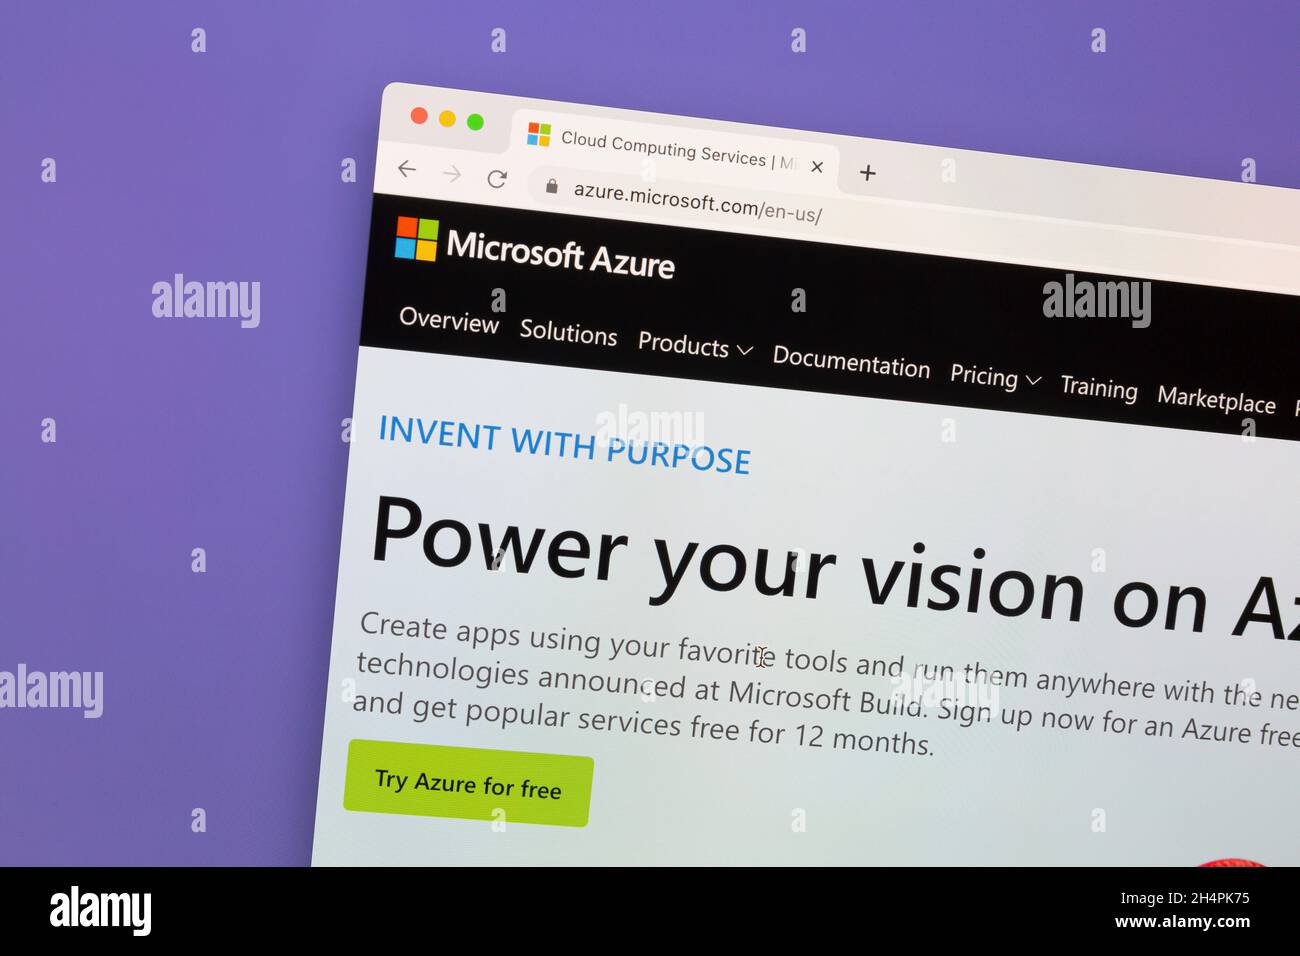 Ostersund, Sweden - April 29, 2021 Microsoft Azure homepage. Microsoft Azure is a cloud computing service created by Microsoft. Stock Photo